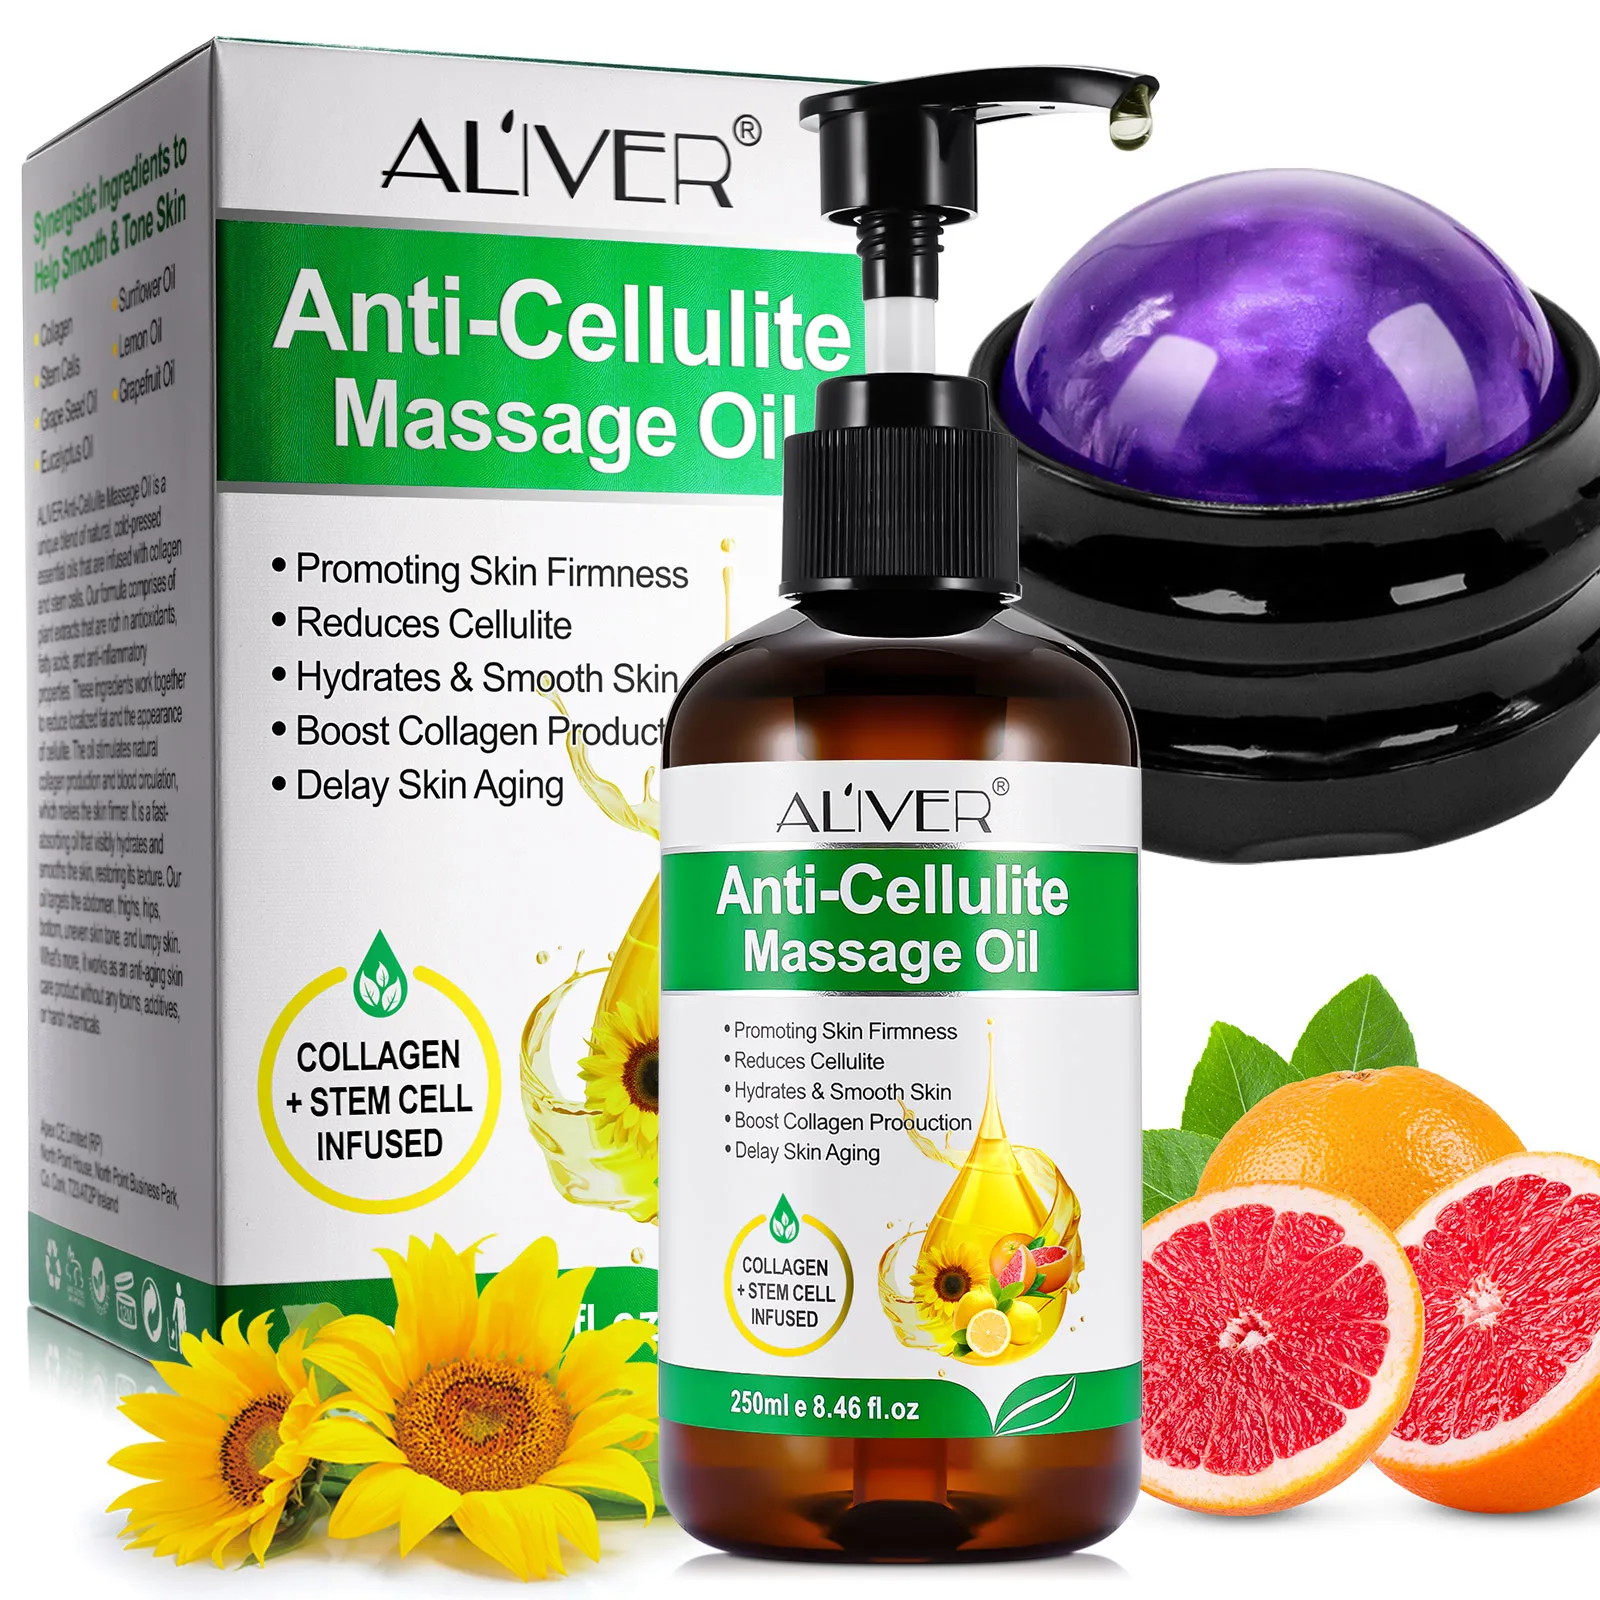 

ALIVER Body Relaxing Sore Muscle Therapy Oil Infused Collagen Stem Cell Instant Toning Firming Anti Cellulite Massage Oil